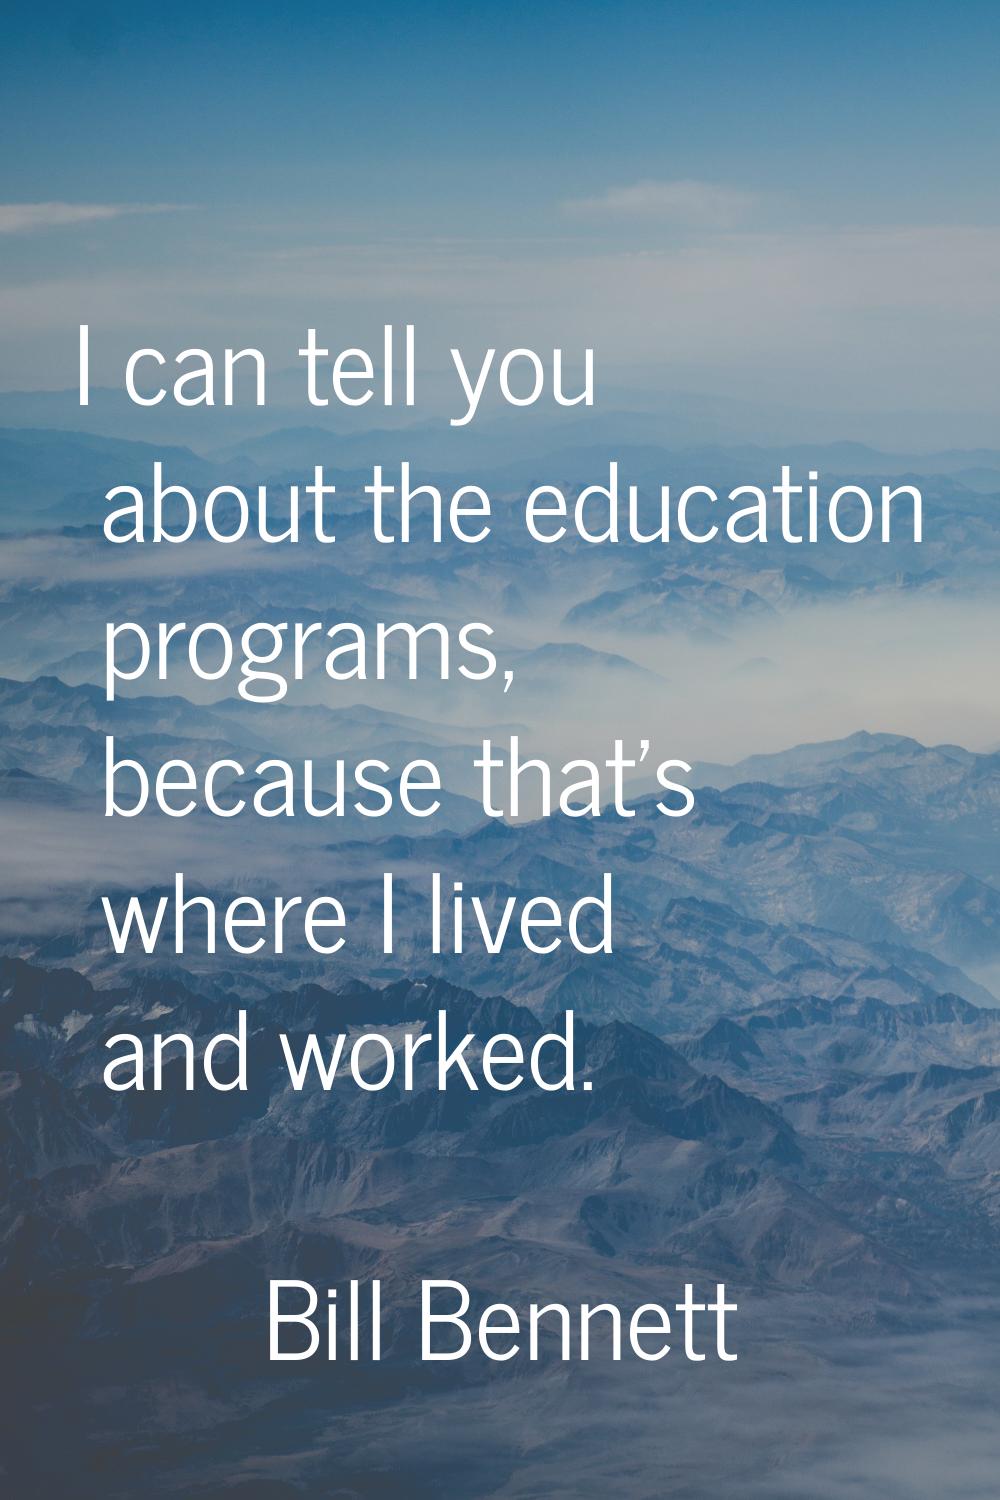 I can tell you about the education programs, because that's where I lived and worked.